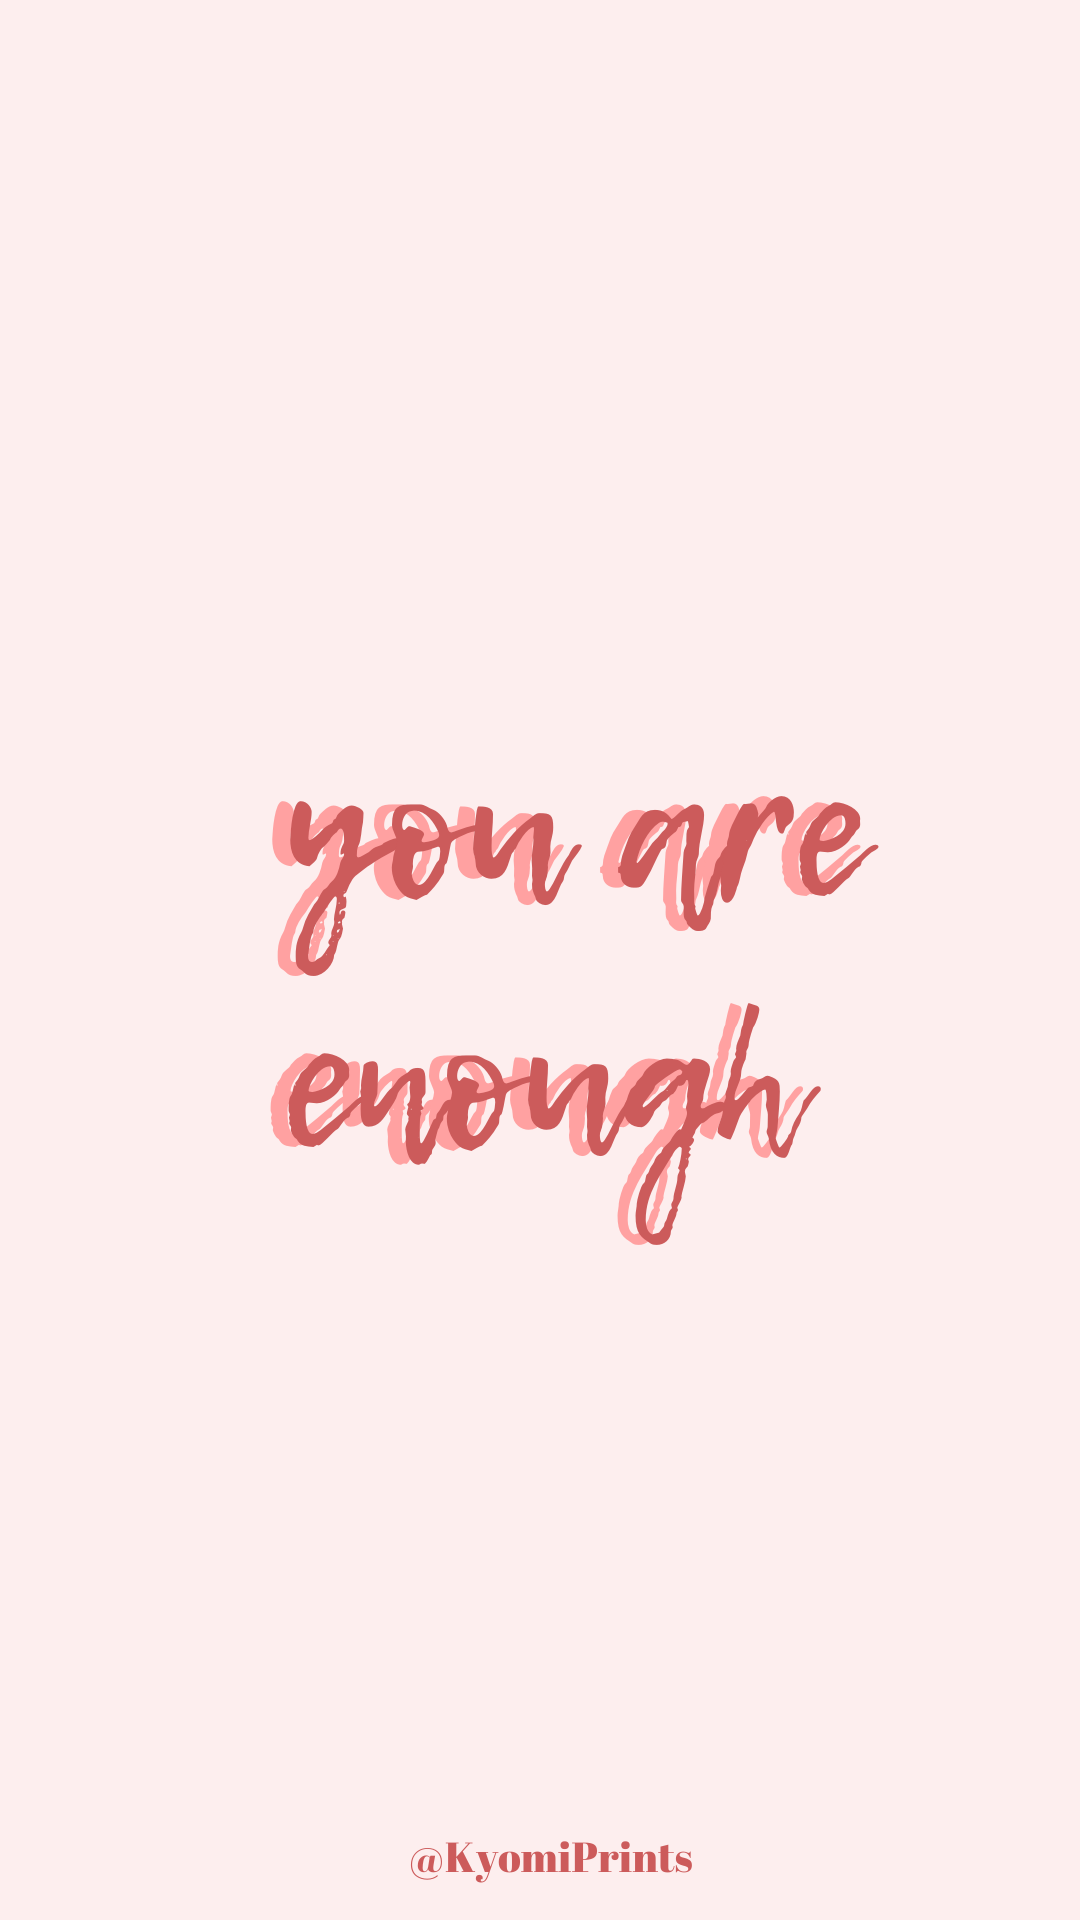 You are enough wallpaper, free wallpaper, iPhone wallpaper, pink aesthetics background -   16 beauty Wallpaper iphone ideas